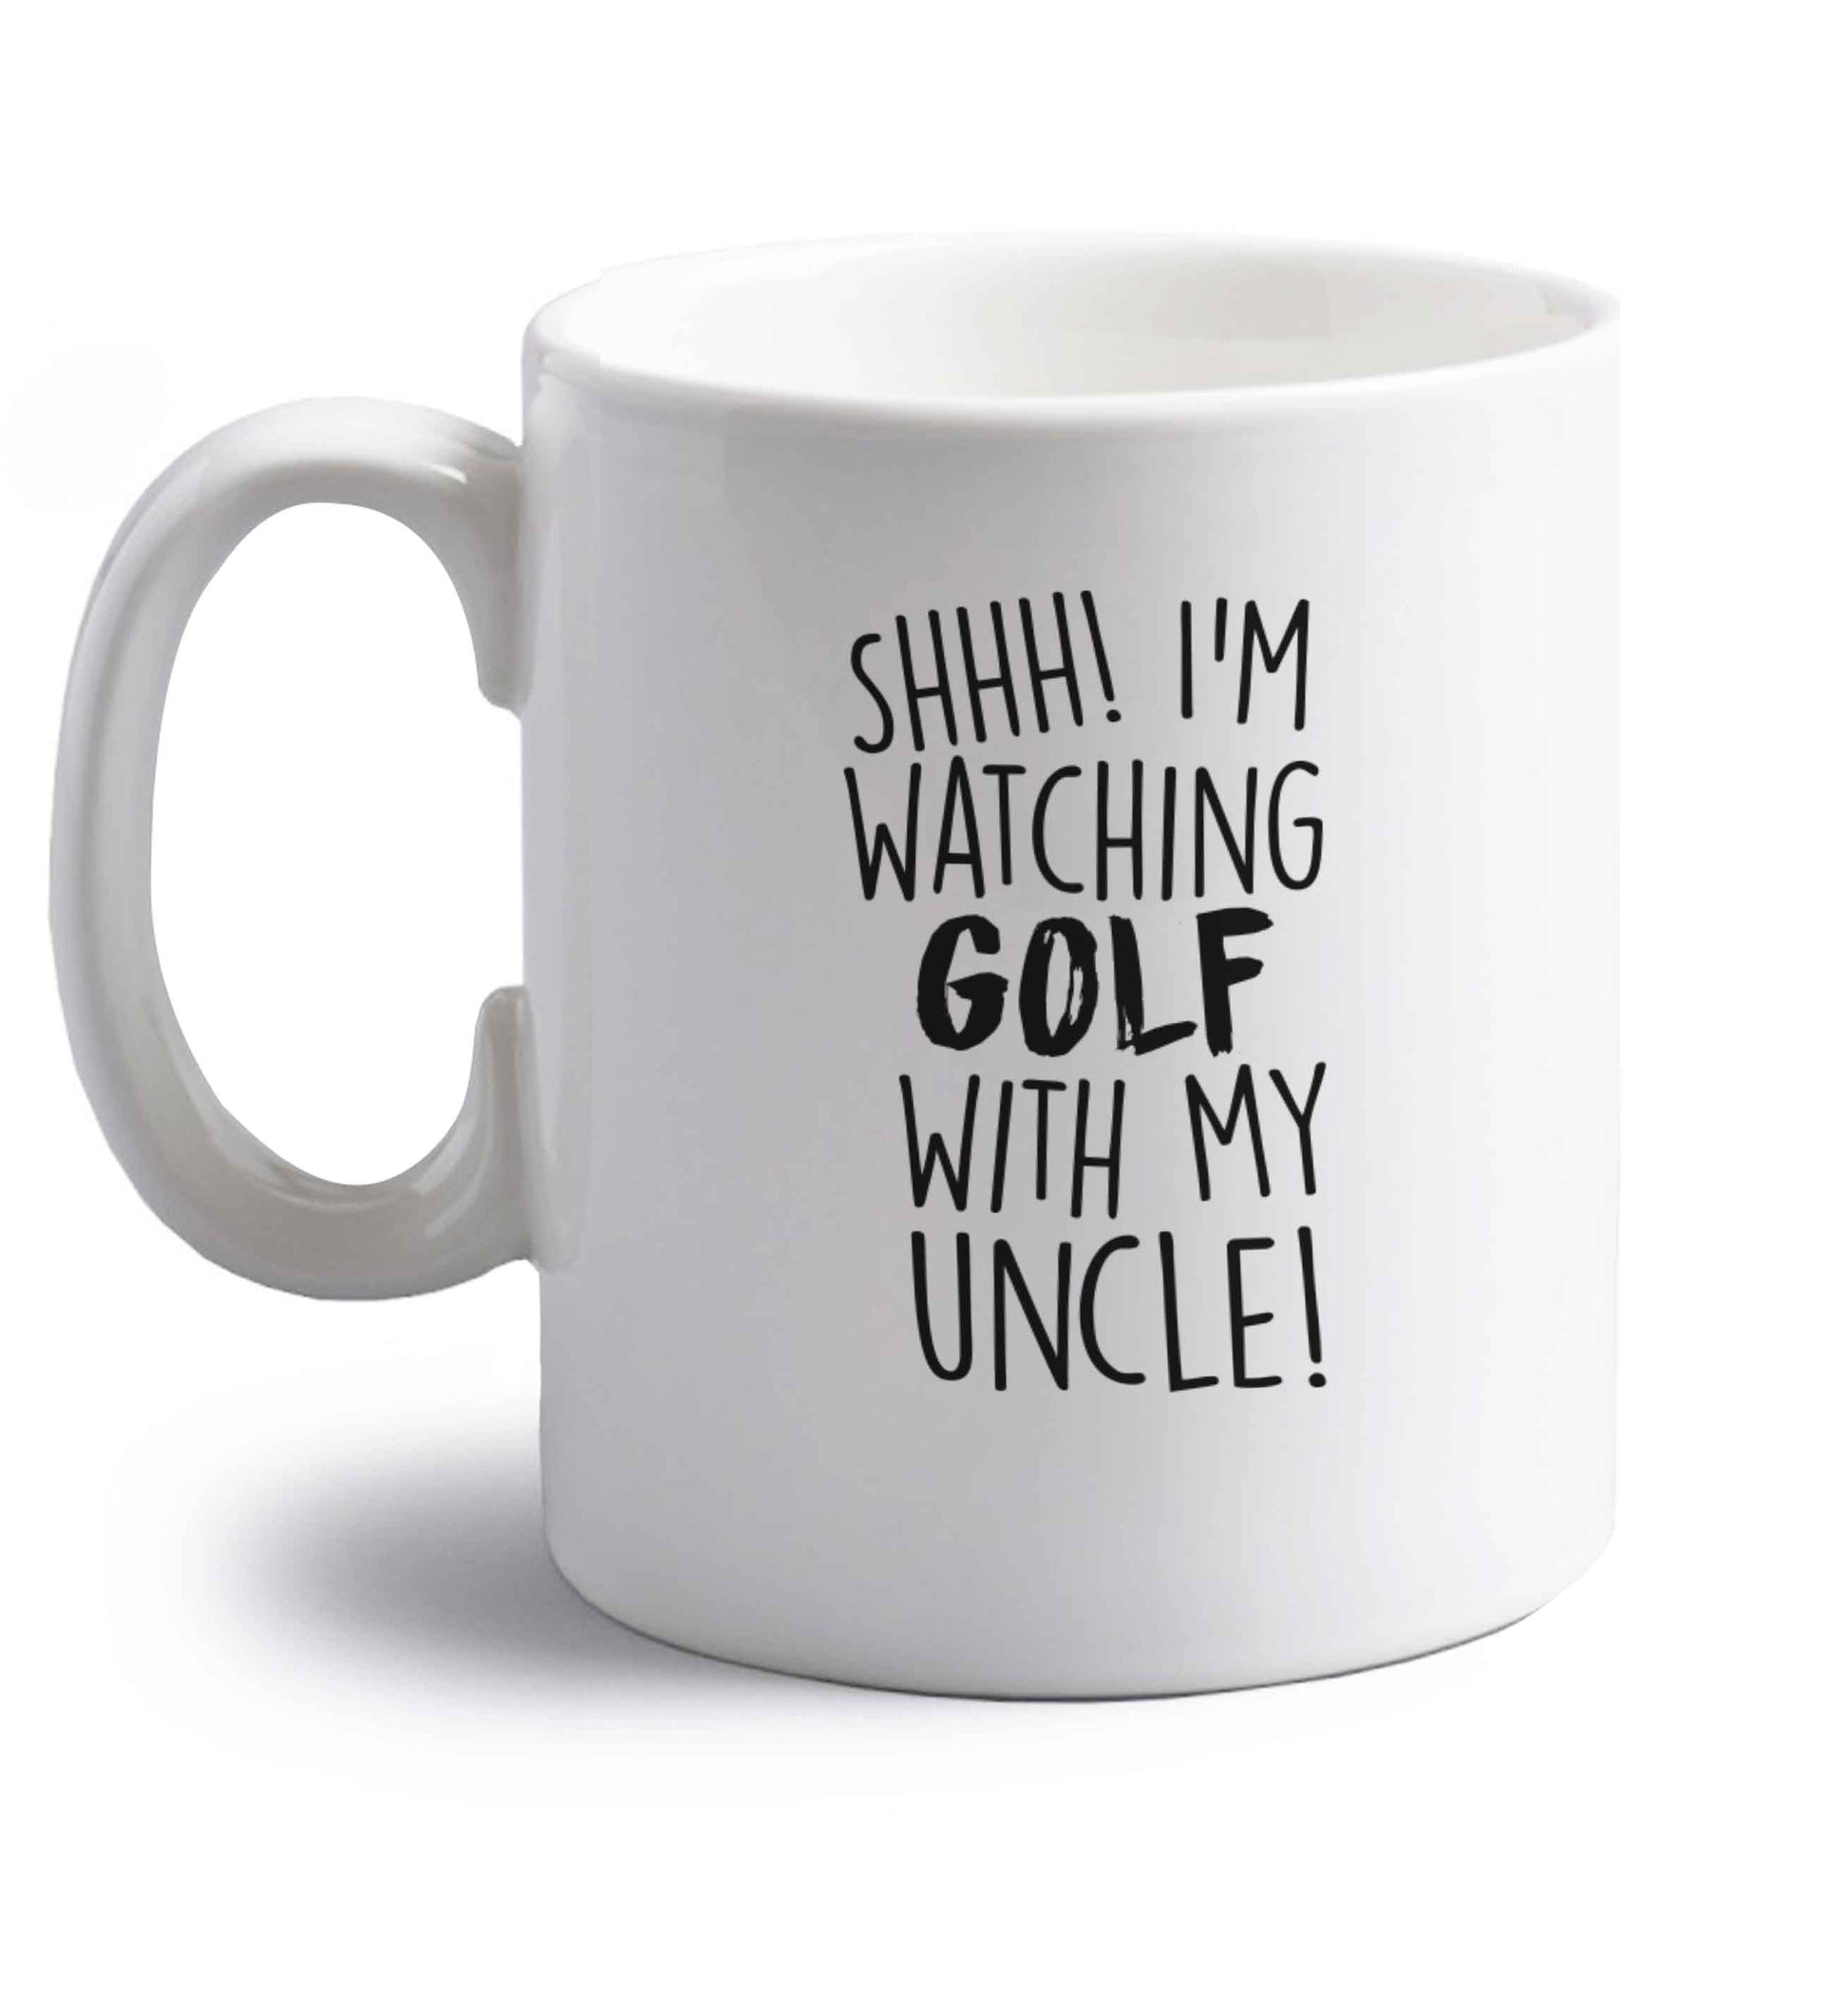 Shh I'm watching golf with my uncle right handed white ceramic mug 